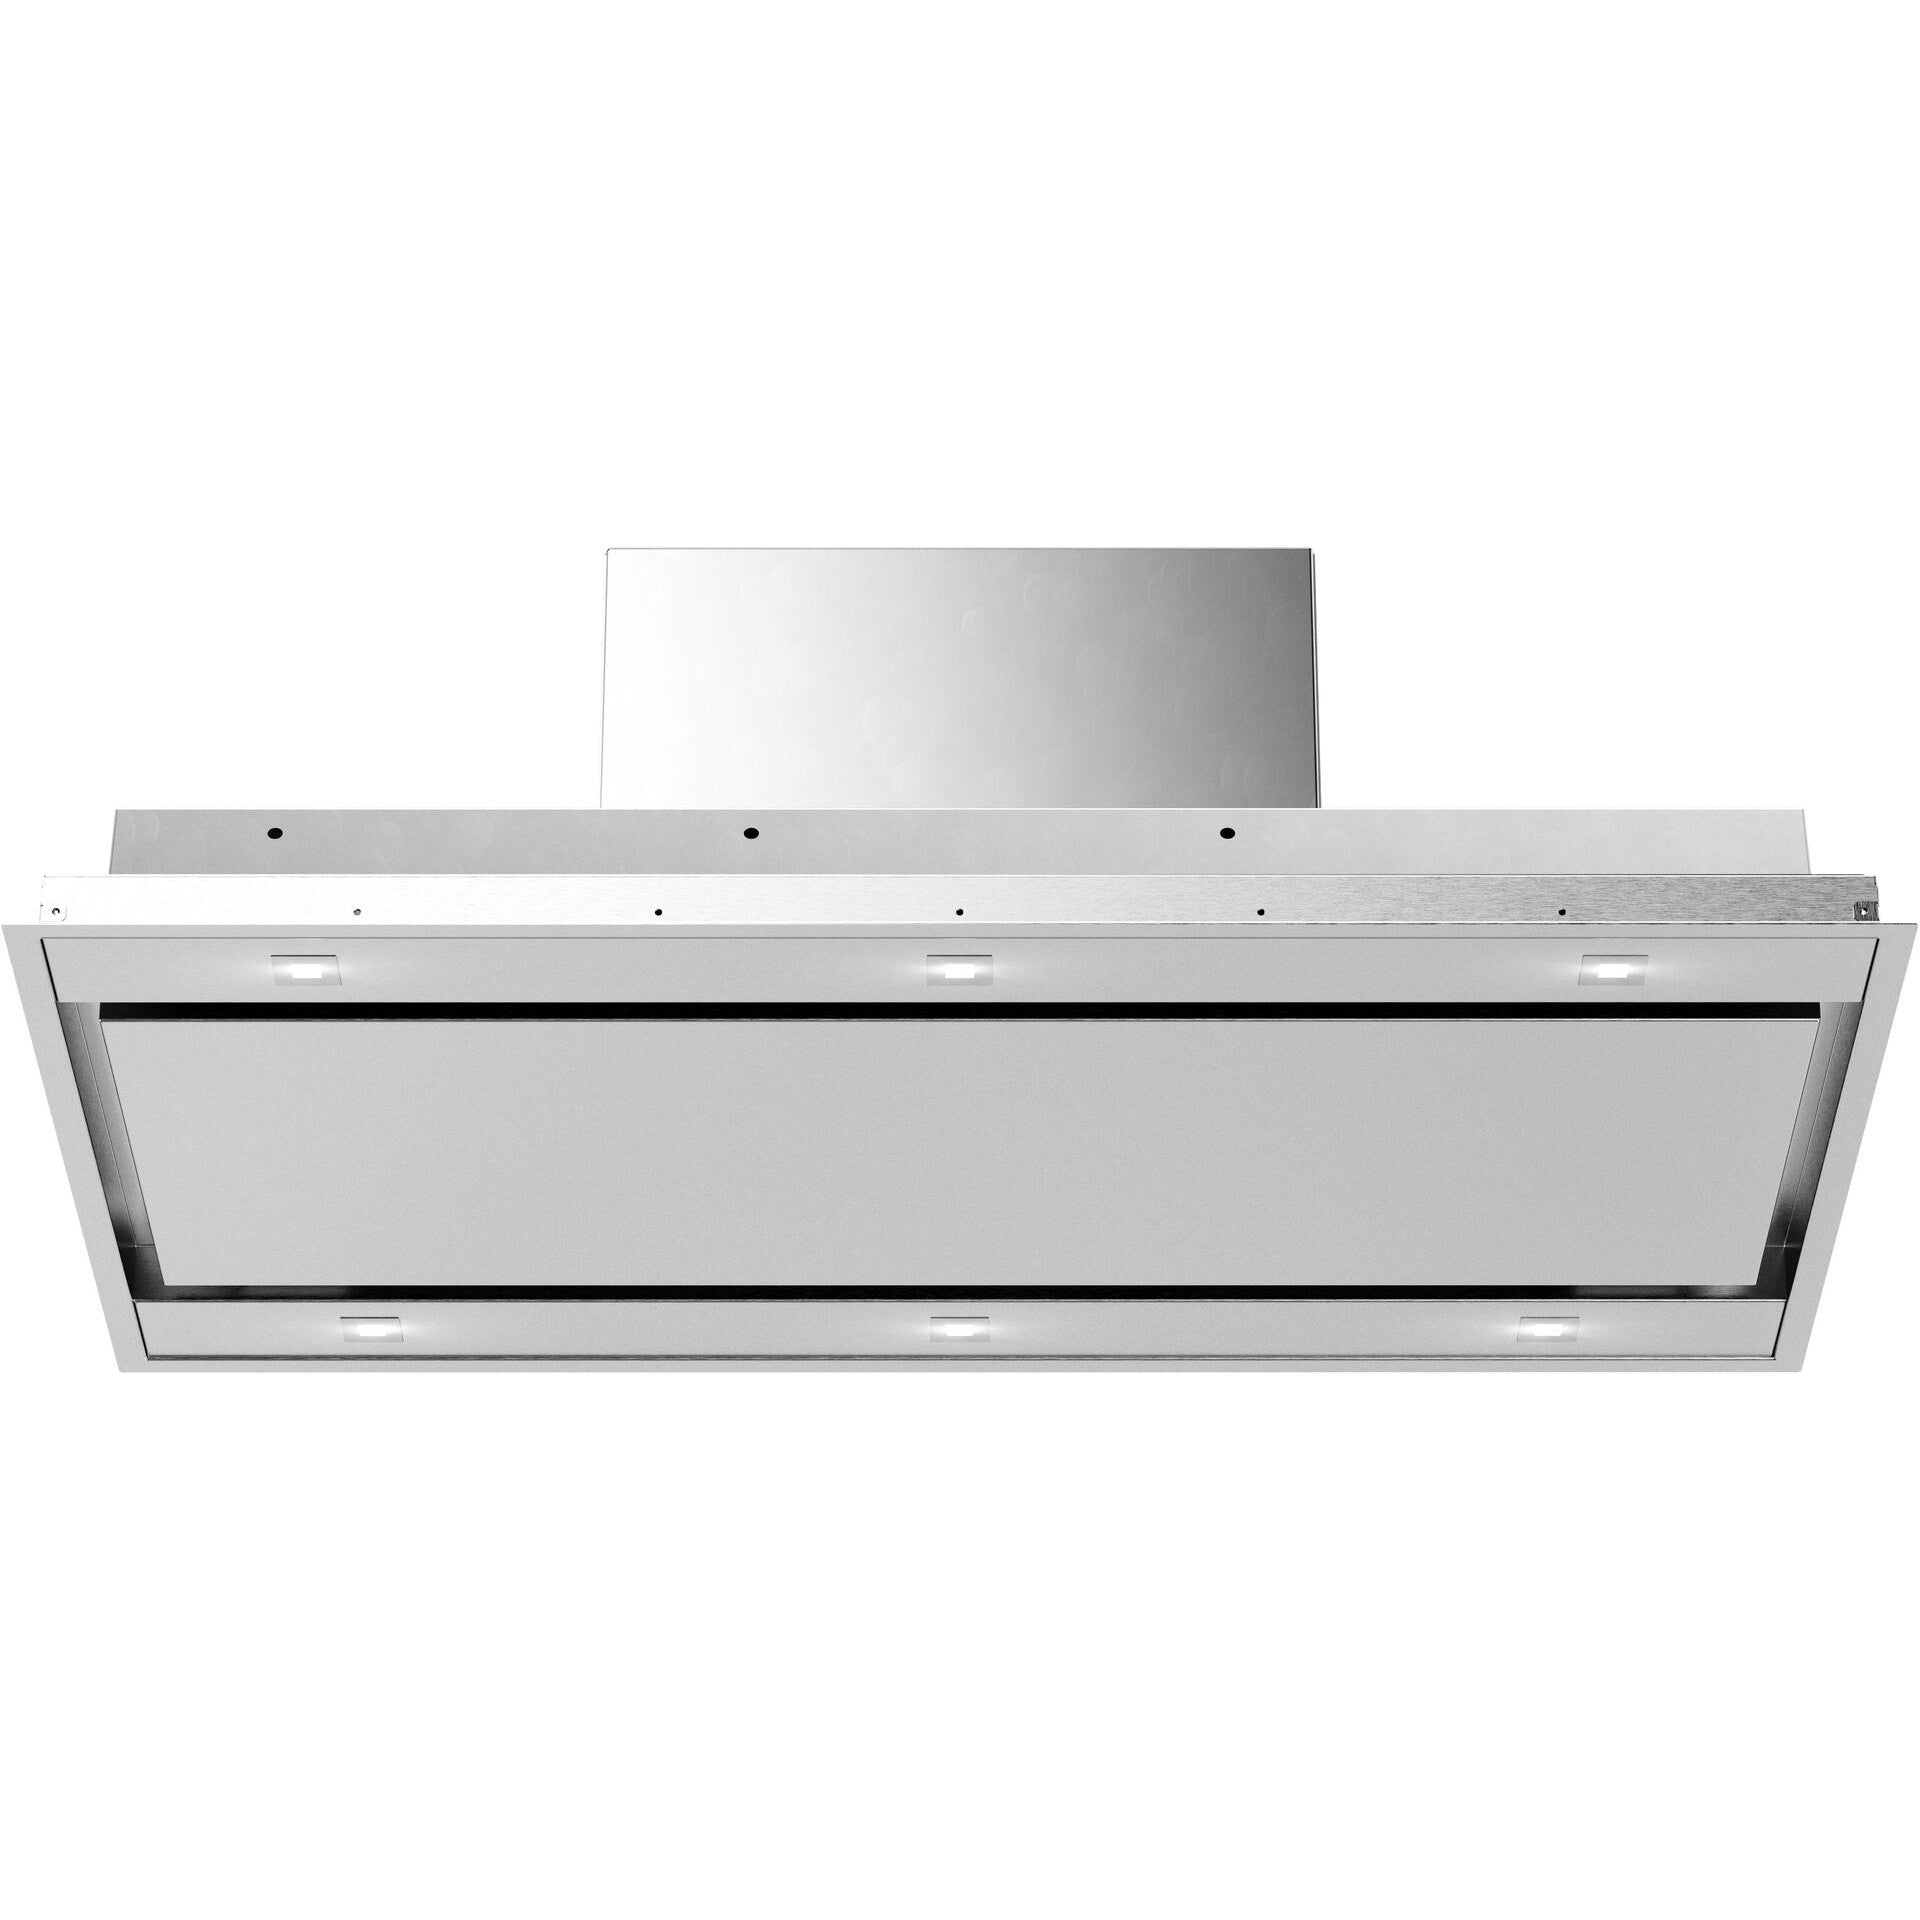 Forte Vertice 36" 600 CFM Convertible Residential Round Duct Stainless Steel Ceiling Mount Range Hood With Recirculating Kit, Charcoal Filters, and LED Lighting